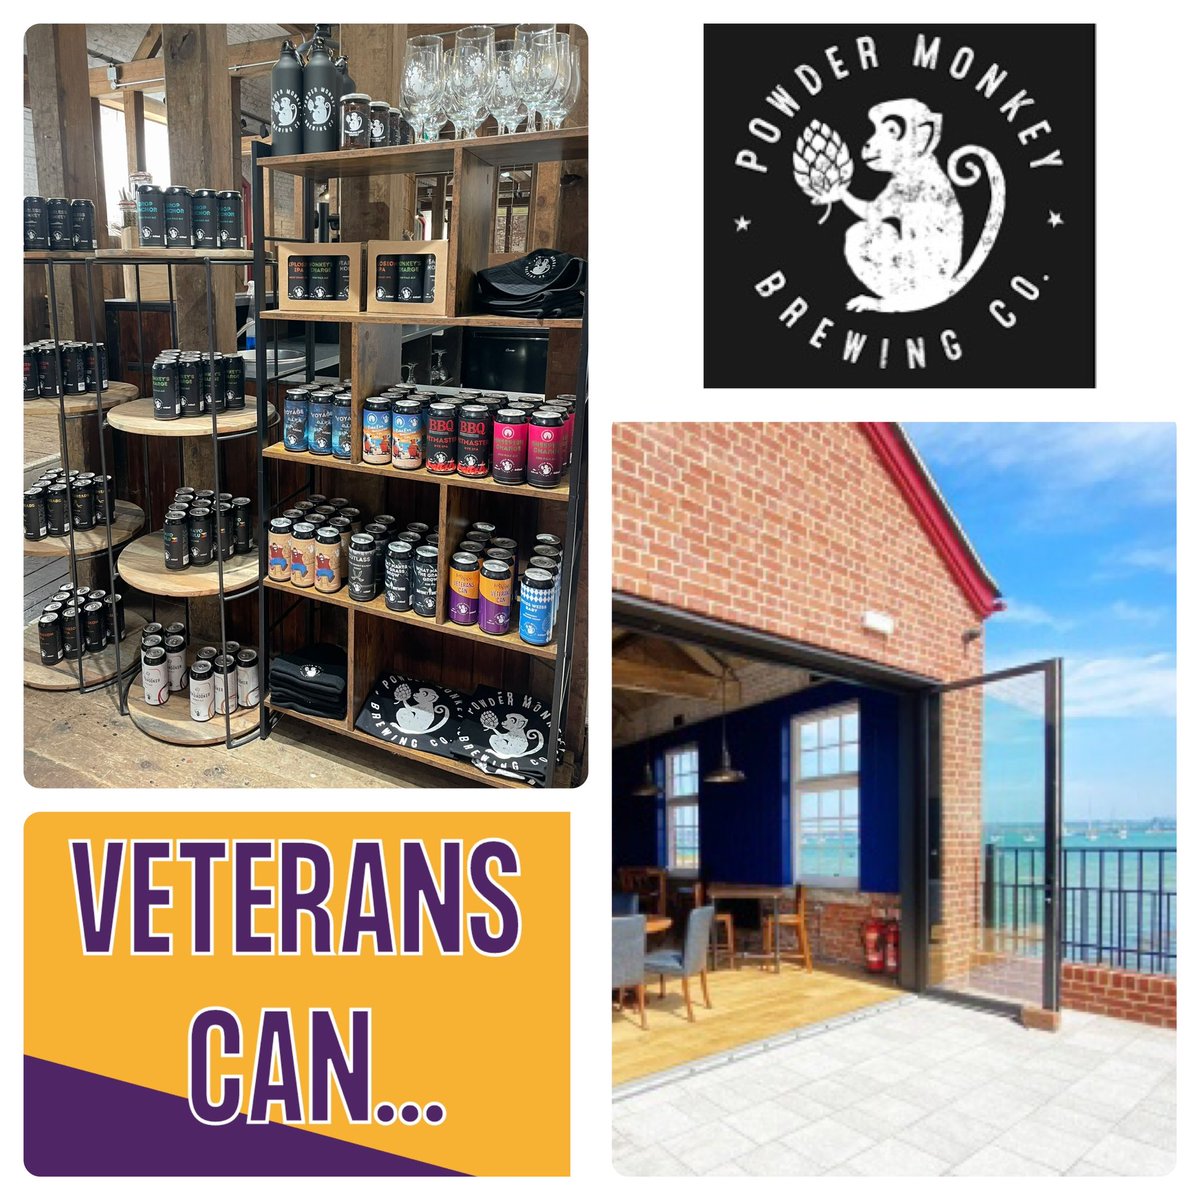 Without collaborative partnerships our innovative & ambitious idea would not be possible - so thanks to The Powder Monkey Group for the support. @Veterans_Can… is about more than beer - but we look forward to seeing the Ale & Pilsner behind their bars in the UK & Australia soon!